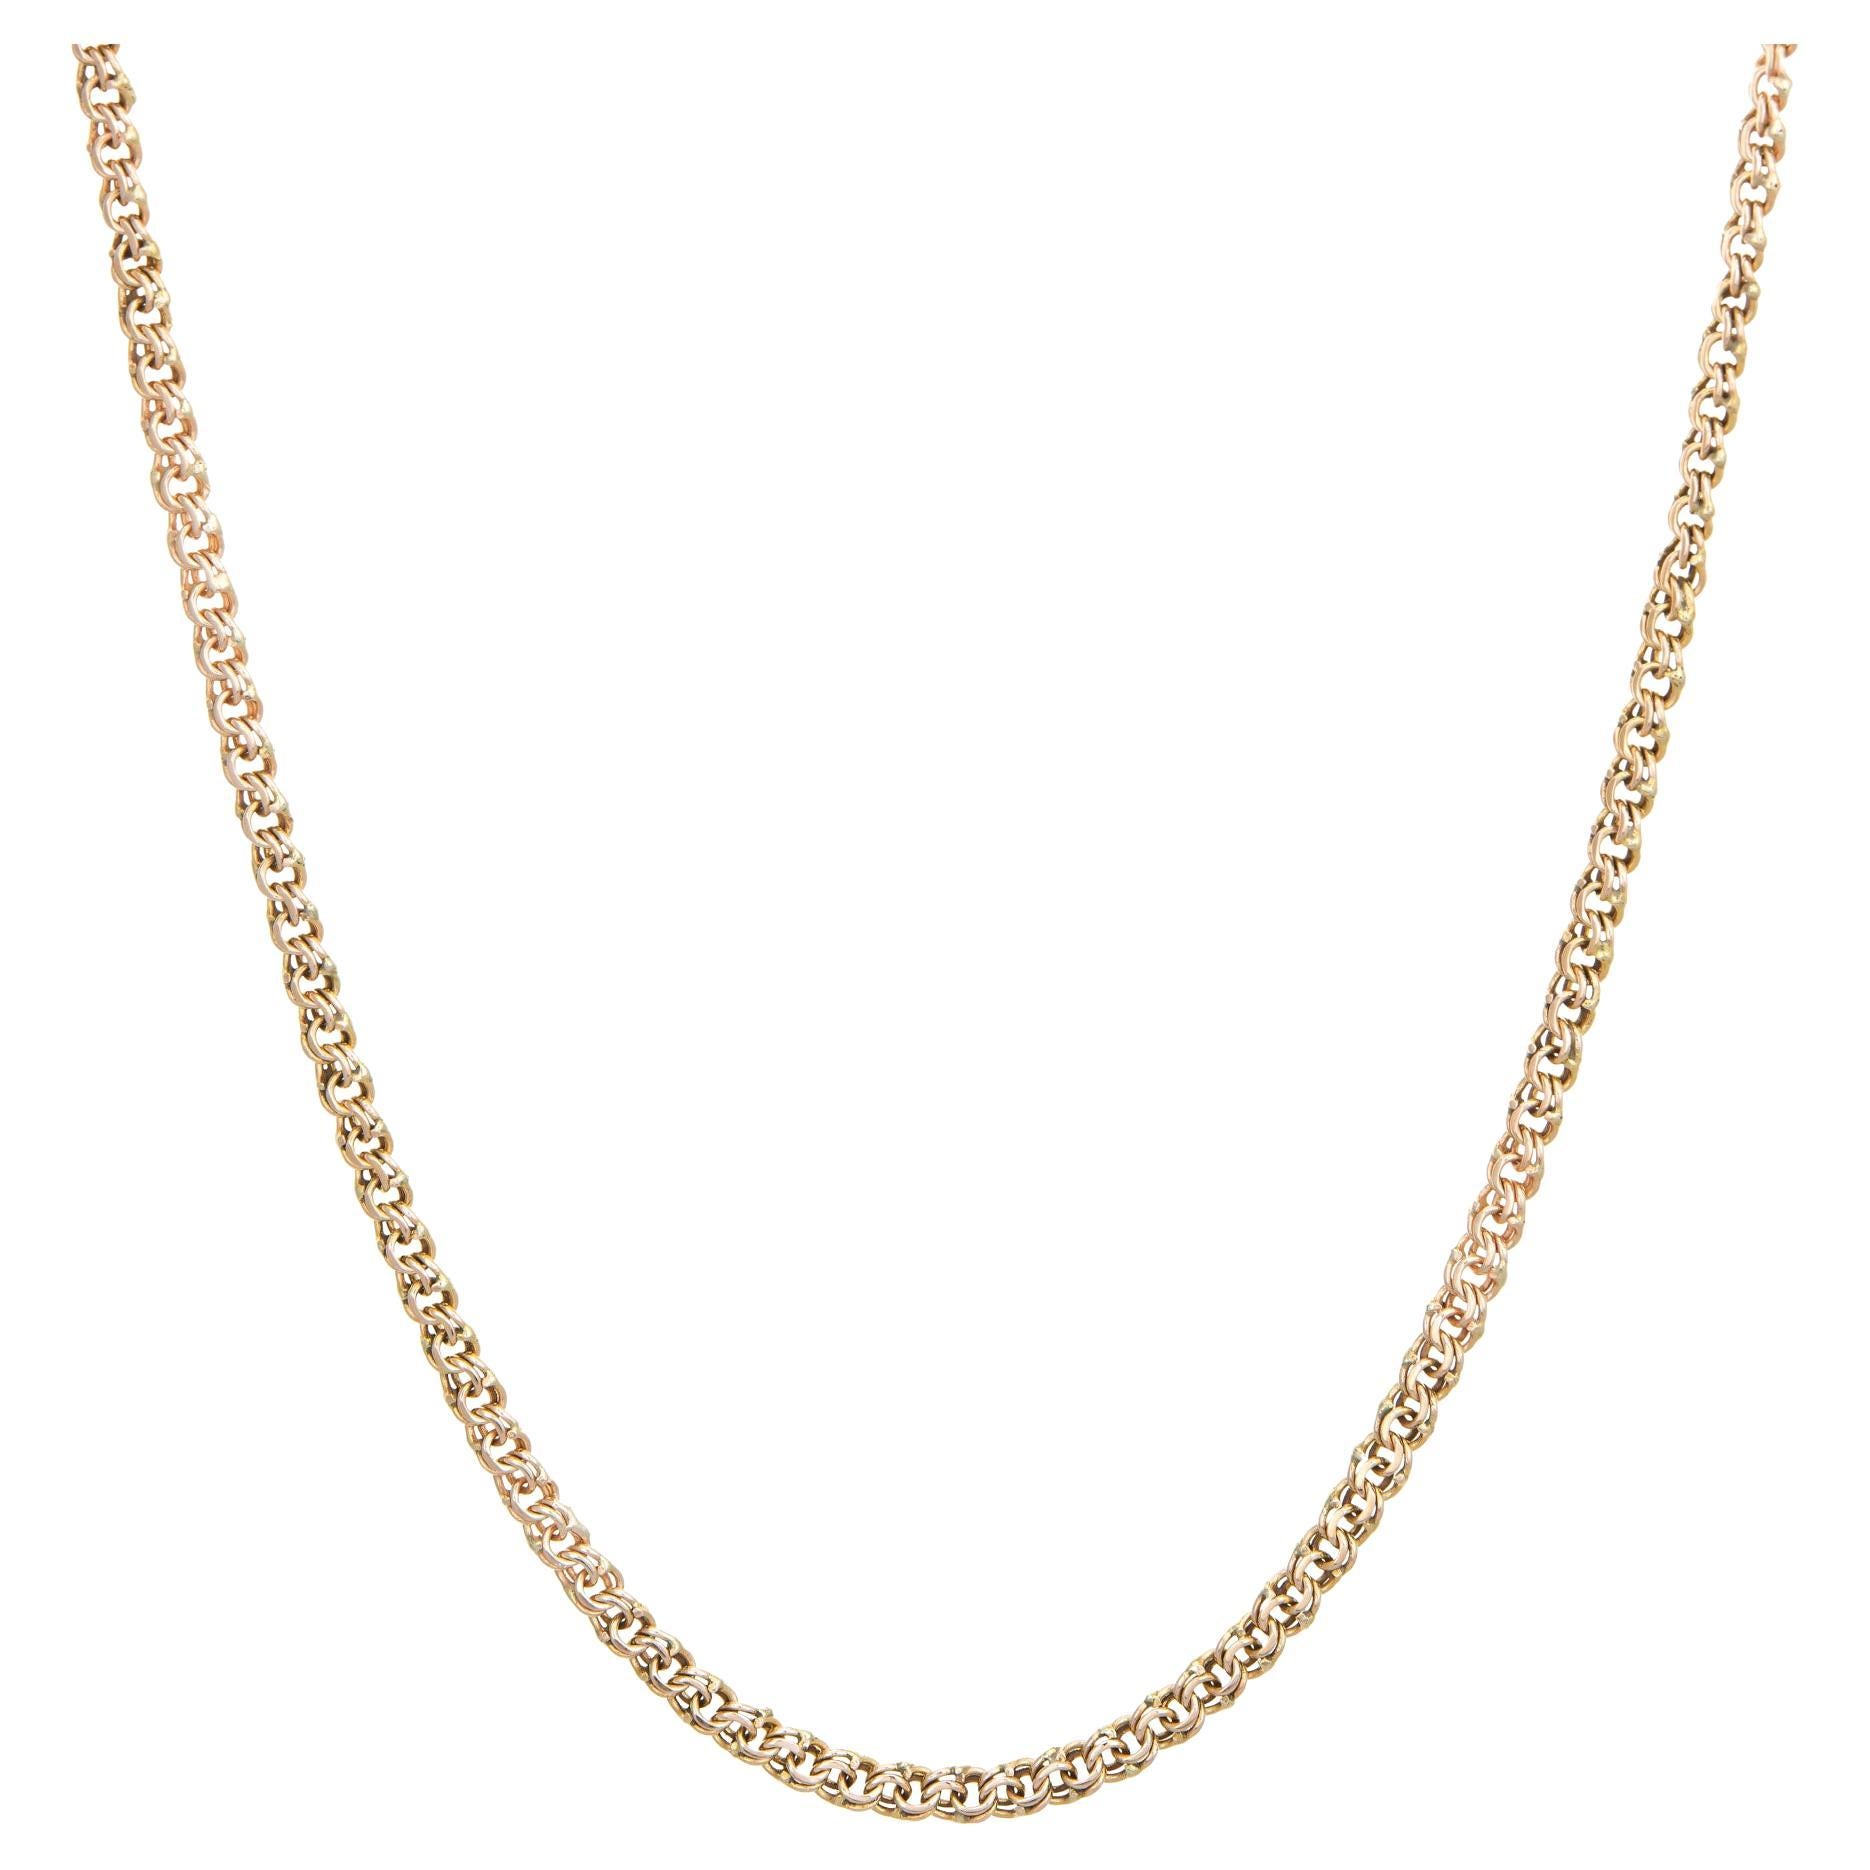 Vintage Chain 10k Yellow Gold Necklace Double Link Estate Jewelry For Sale